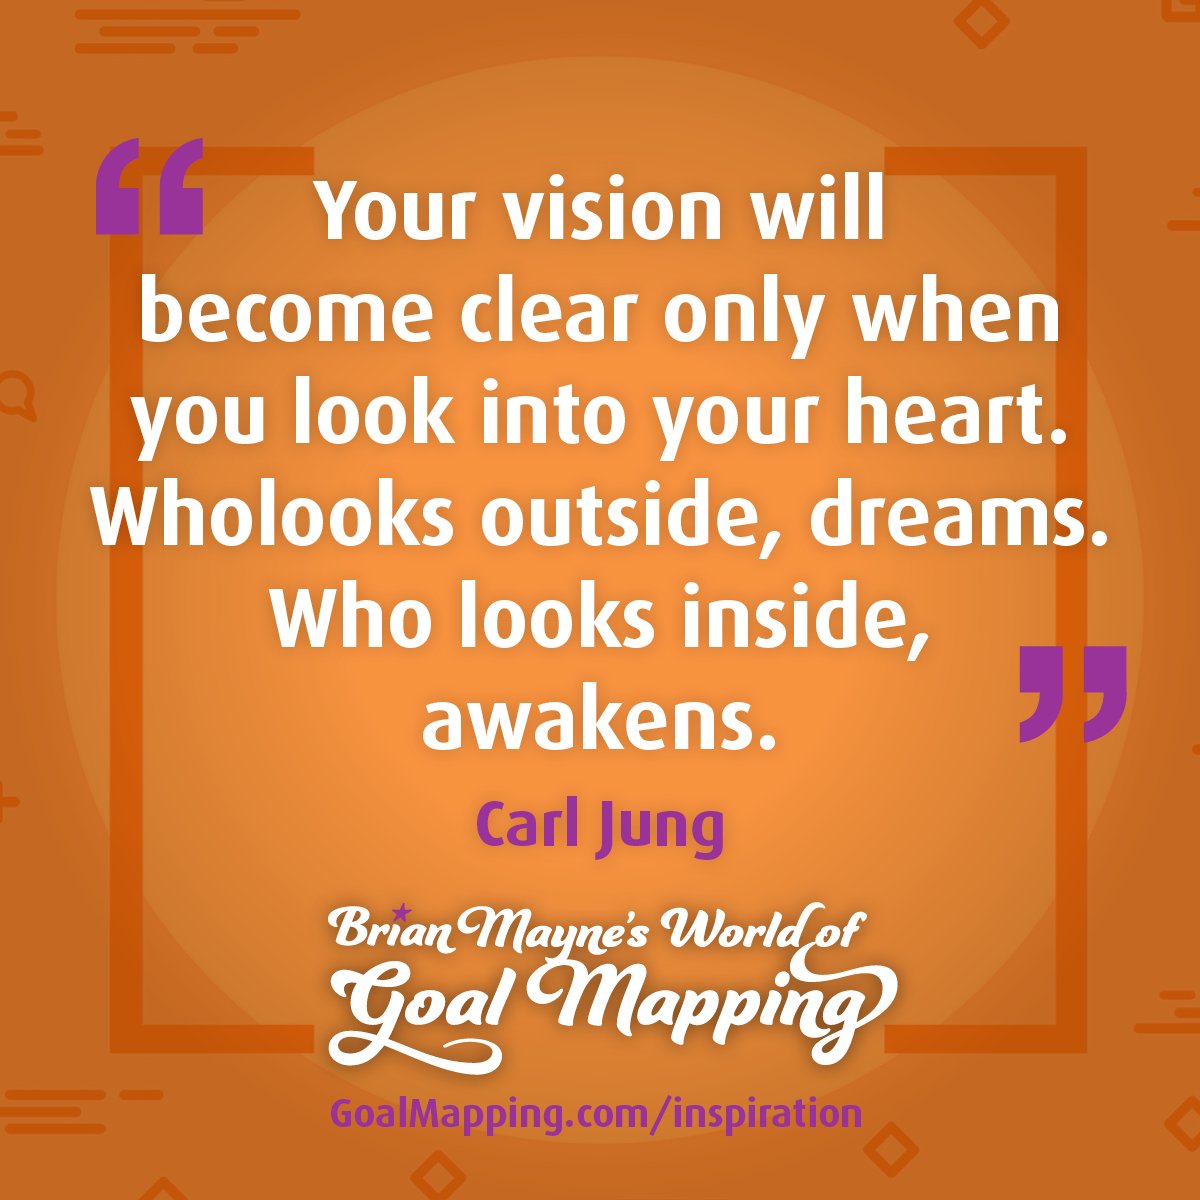 "Your vision will become clear only when you look into your heart. Who looks outside, dreams. Who looks inside, awakens." Carl Jung